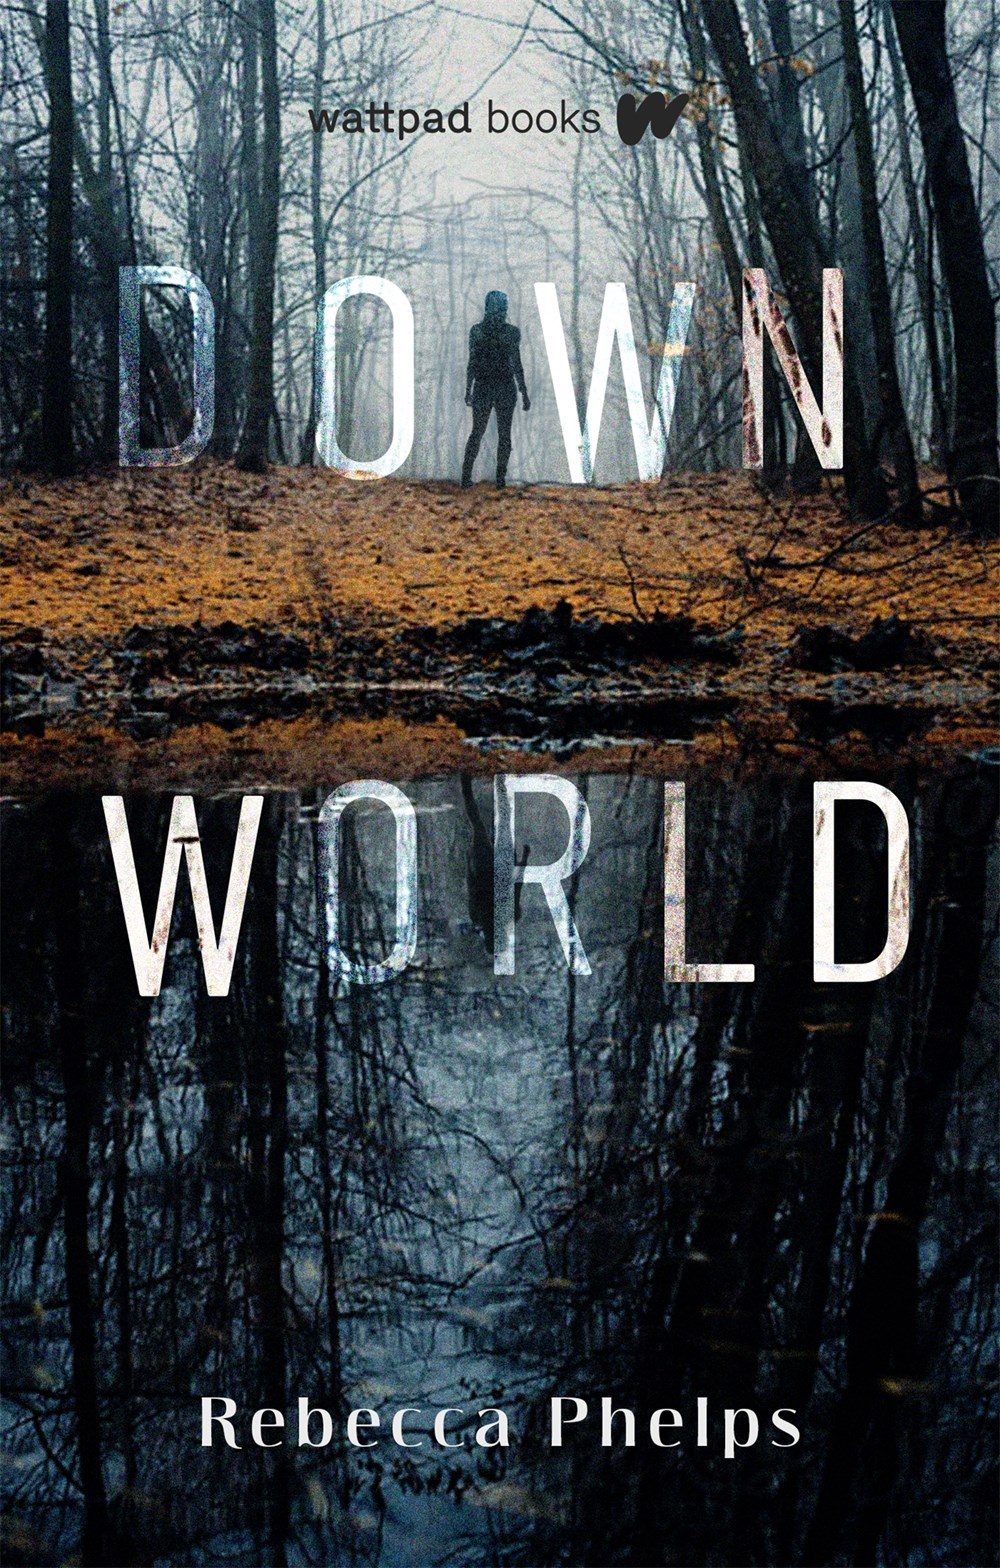 Down World By Rebecca Phelps Release Date? 2021 YA Science Fiction & Horror Releases